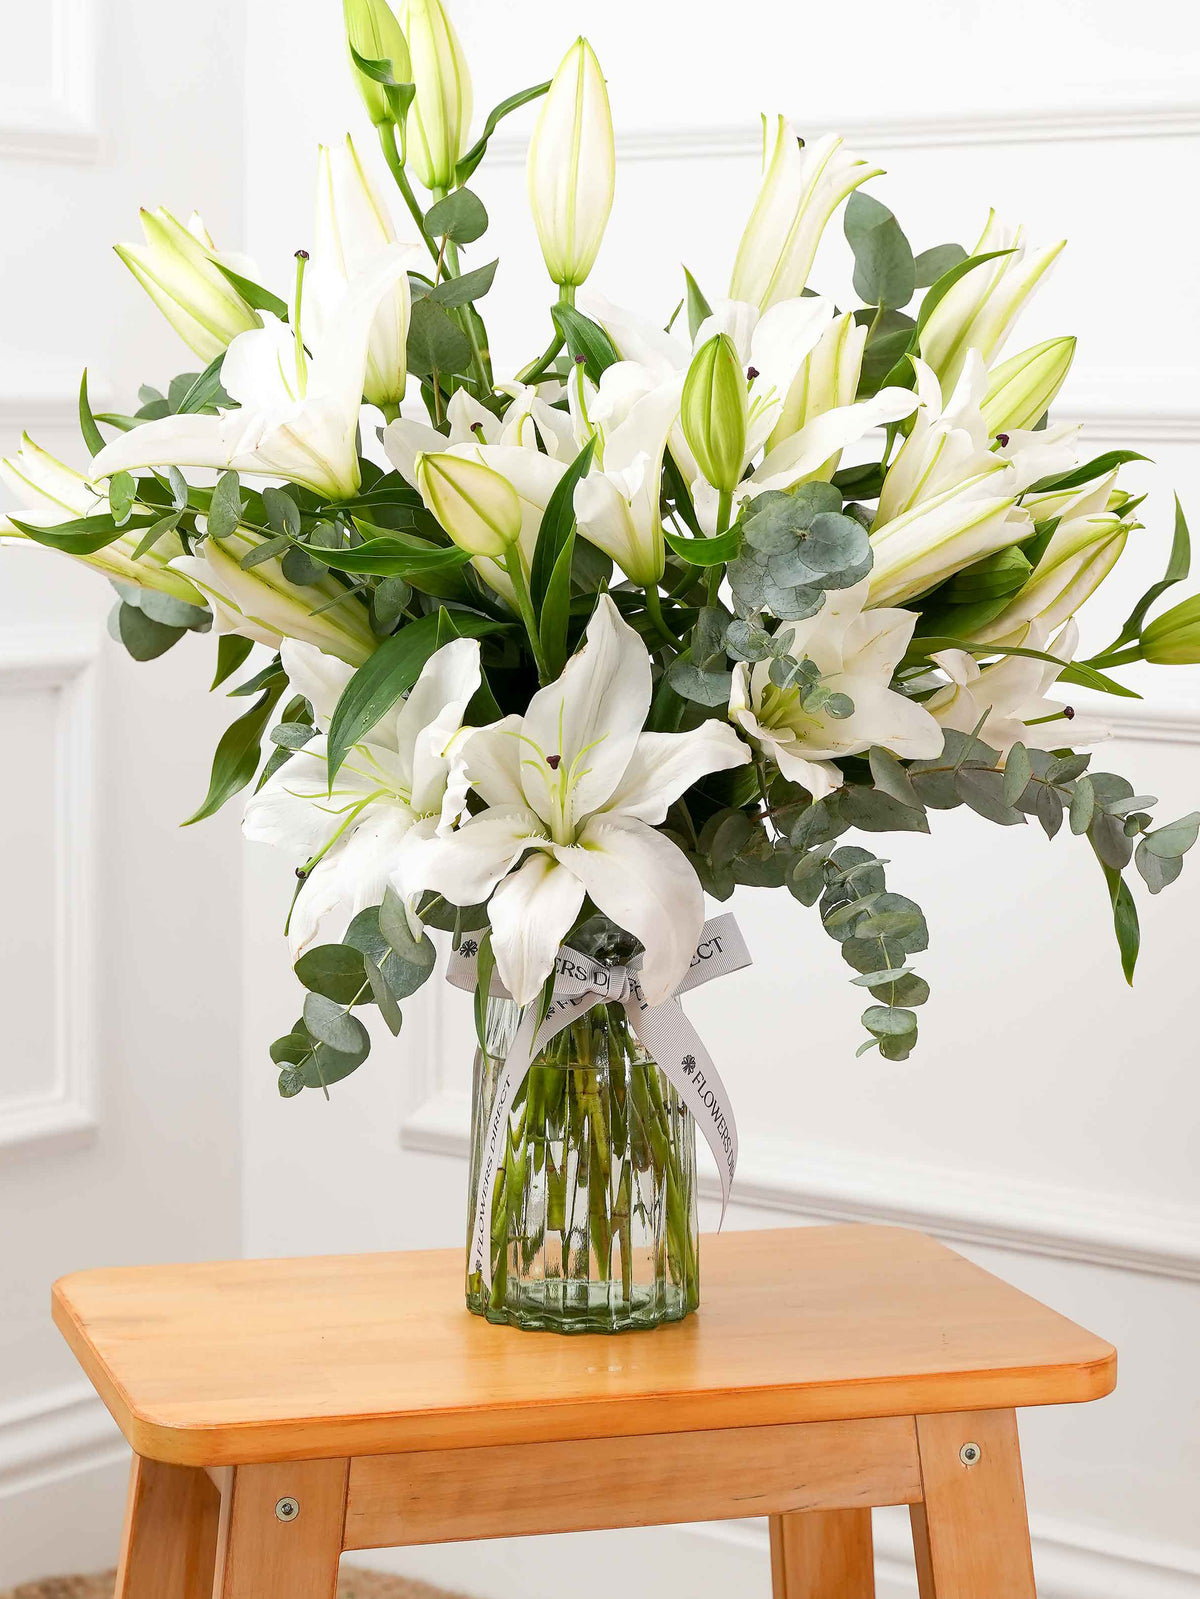 White Lily in a vase